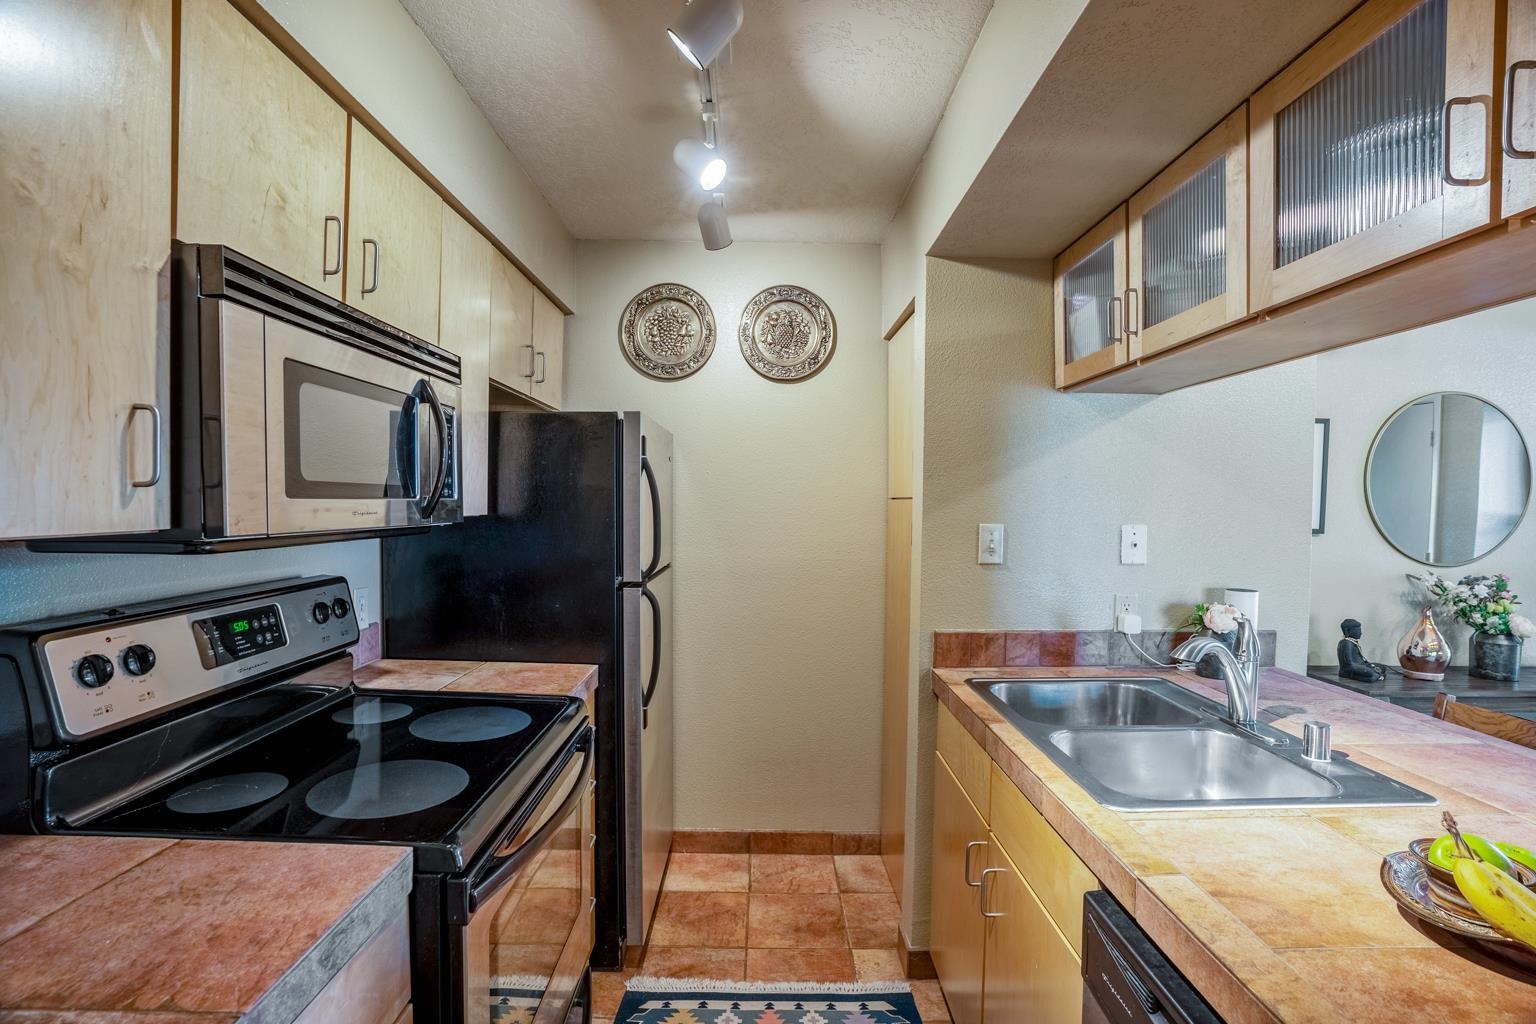 941 Calle Mejia Unit 331, Santa Fe, New Mexico 87501, 1 Bedroom Bedrooms, ,1 BathroomBathrooms,Residential,For Sale,941 Calle Mejia Unit 331,202201742